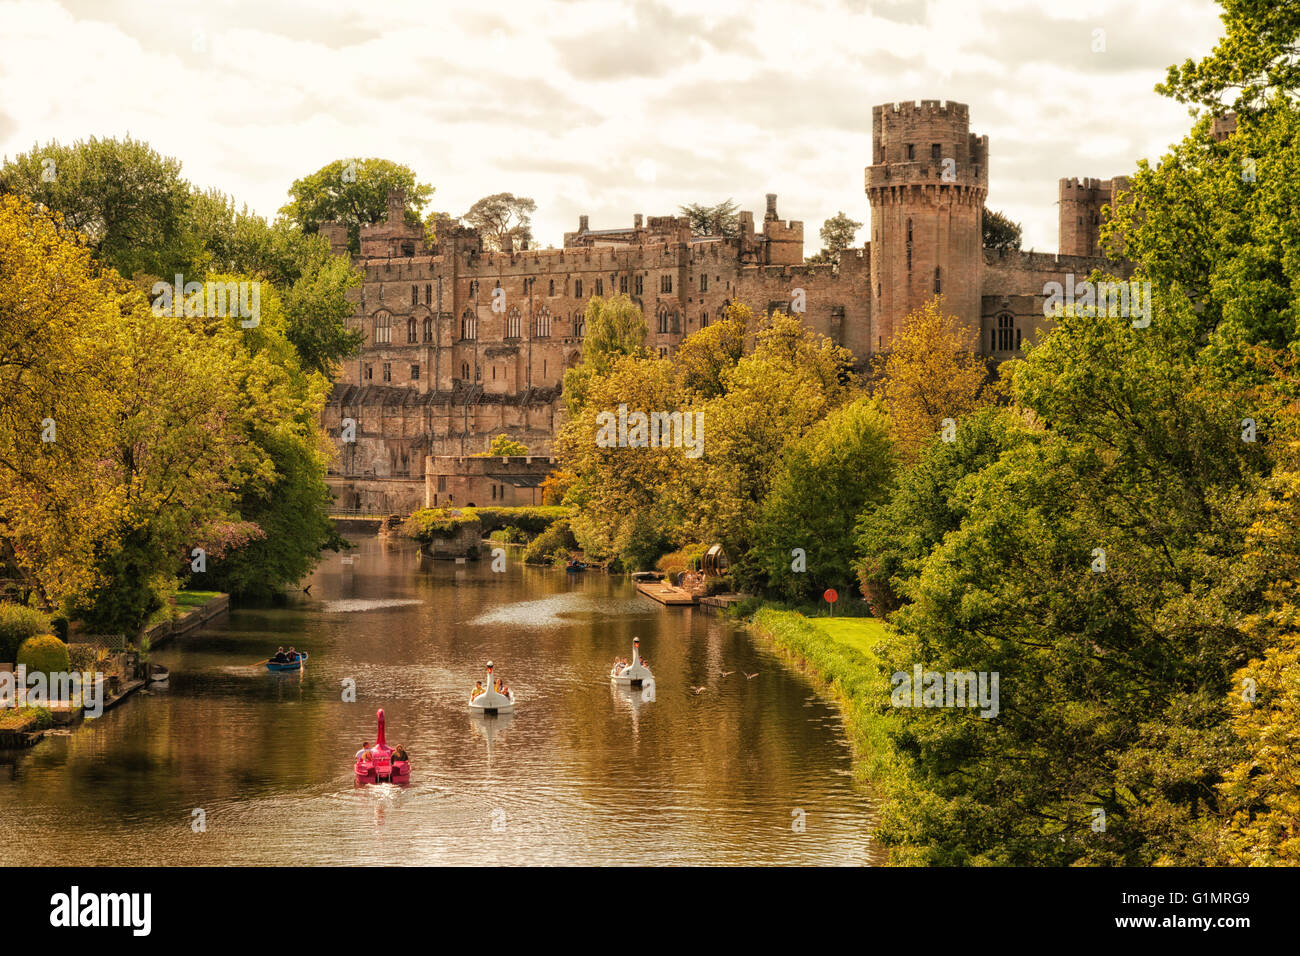 Medieval British castles and buildings; view of the 12th century Warwick Castle and the River Avon, Warwick, Warwickshire, England UK Stock Photo